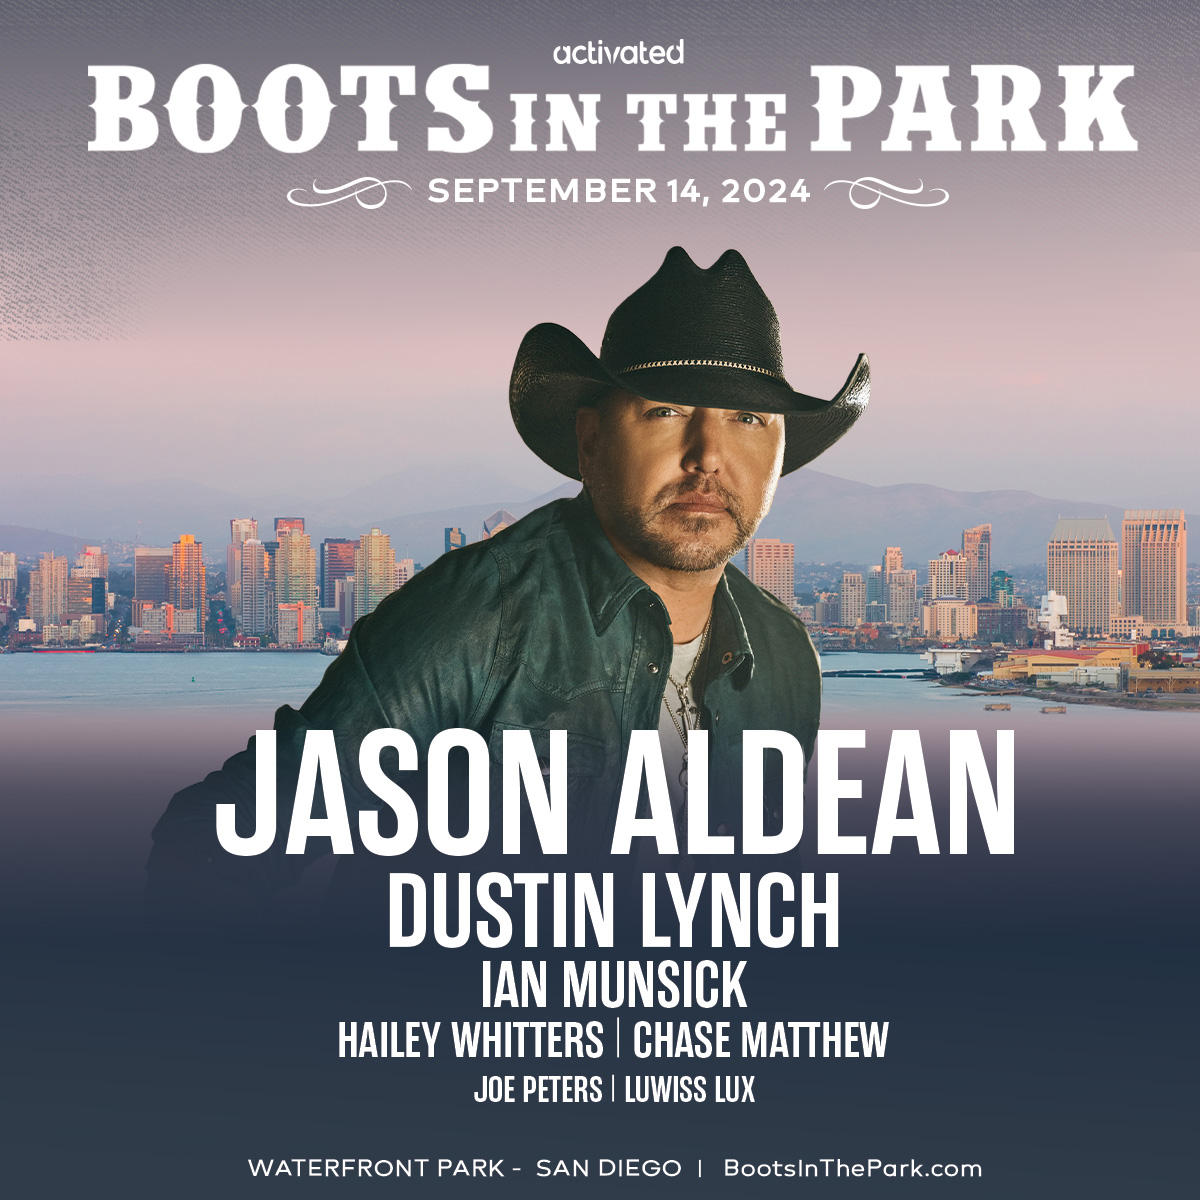 Get excited, SAN DIEGO! #BootsInThePark is coming back with a KILLER lineup SEPTEMBER 14TH!!🔥🤠 Catch artists like @jasonaldean @dustinlynchmusic @ianmunsick and more! Presale starts THIS THURSDAY APRIL 11TH! Head to the link in our bio to sign up for presale access!